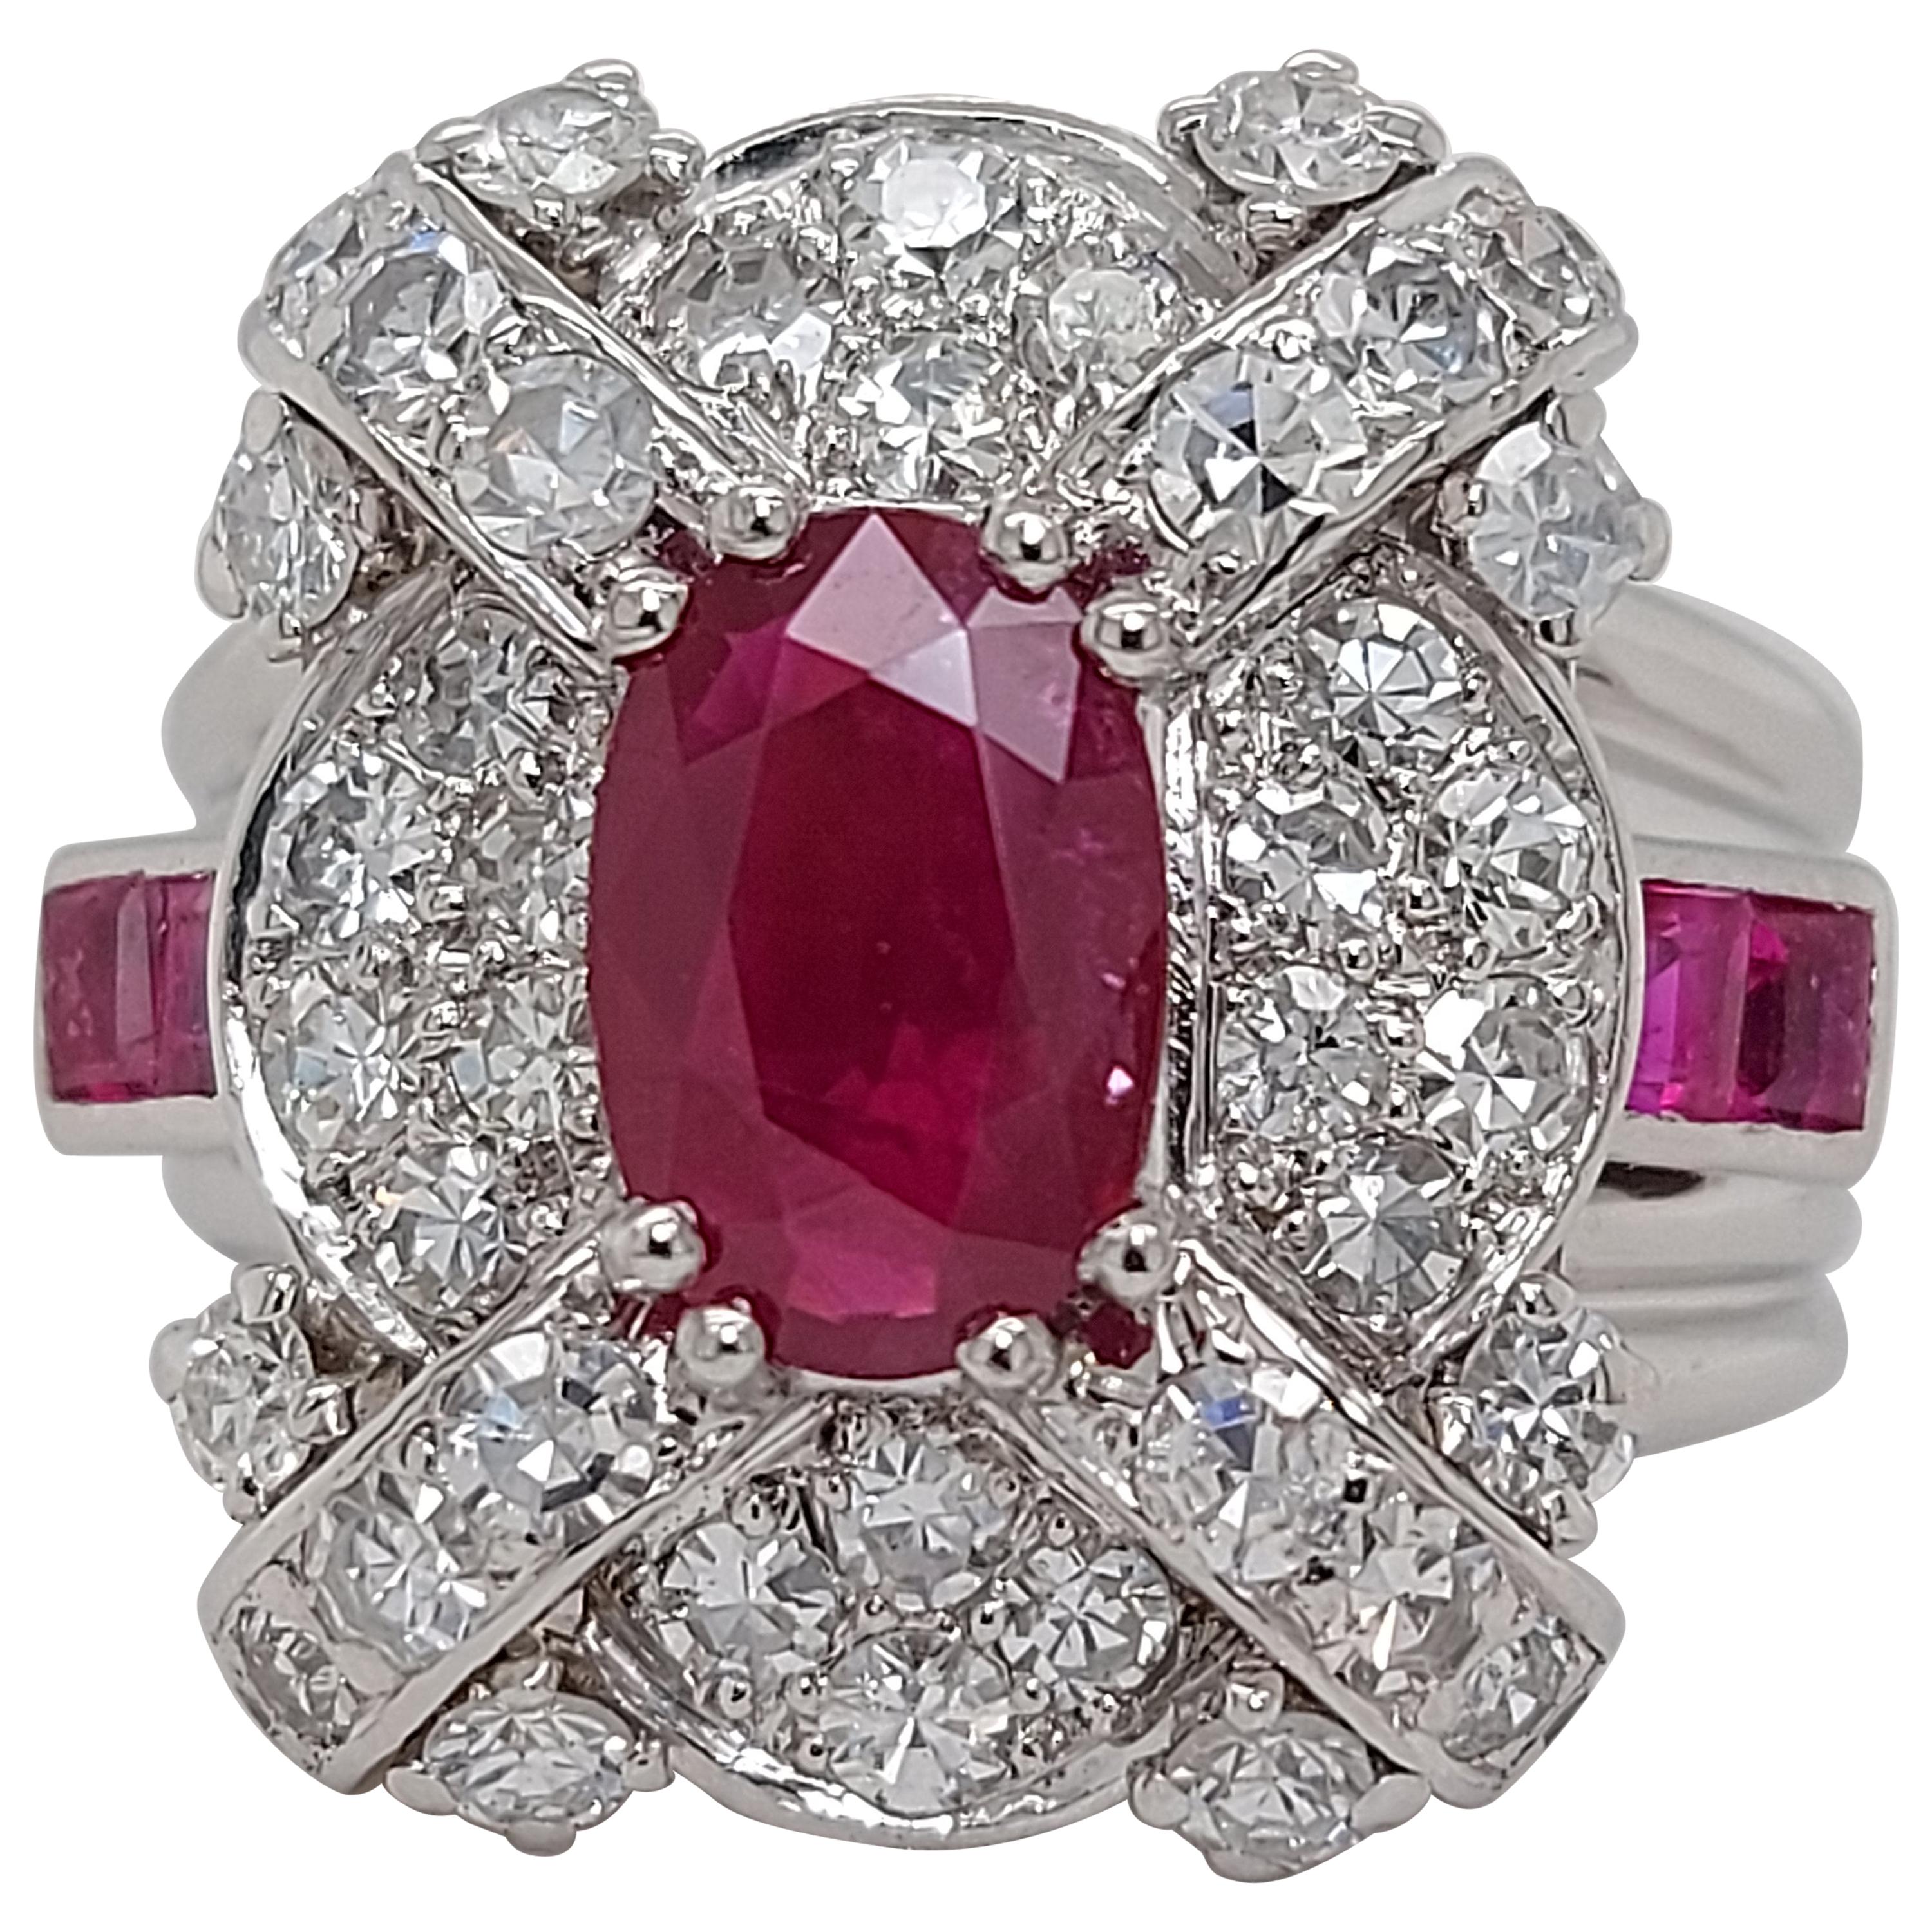 Stunning Platinum Ring with 1.14 Carat Ruby and Diamonds